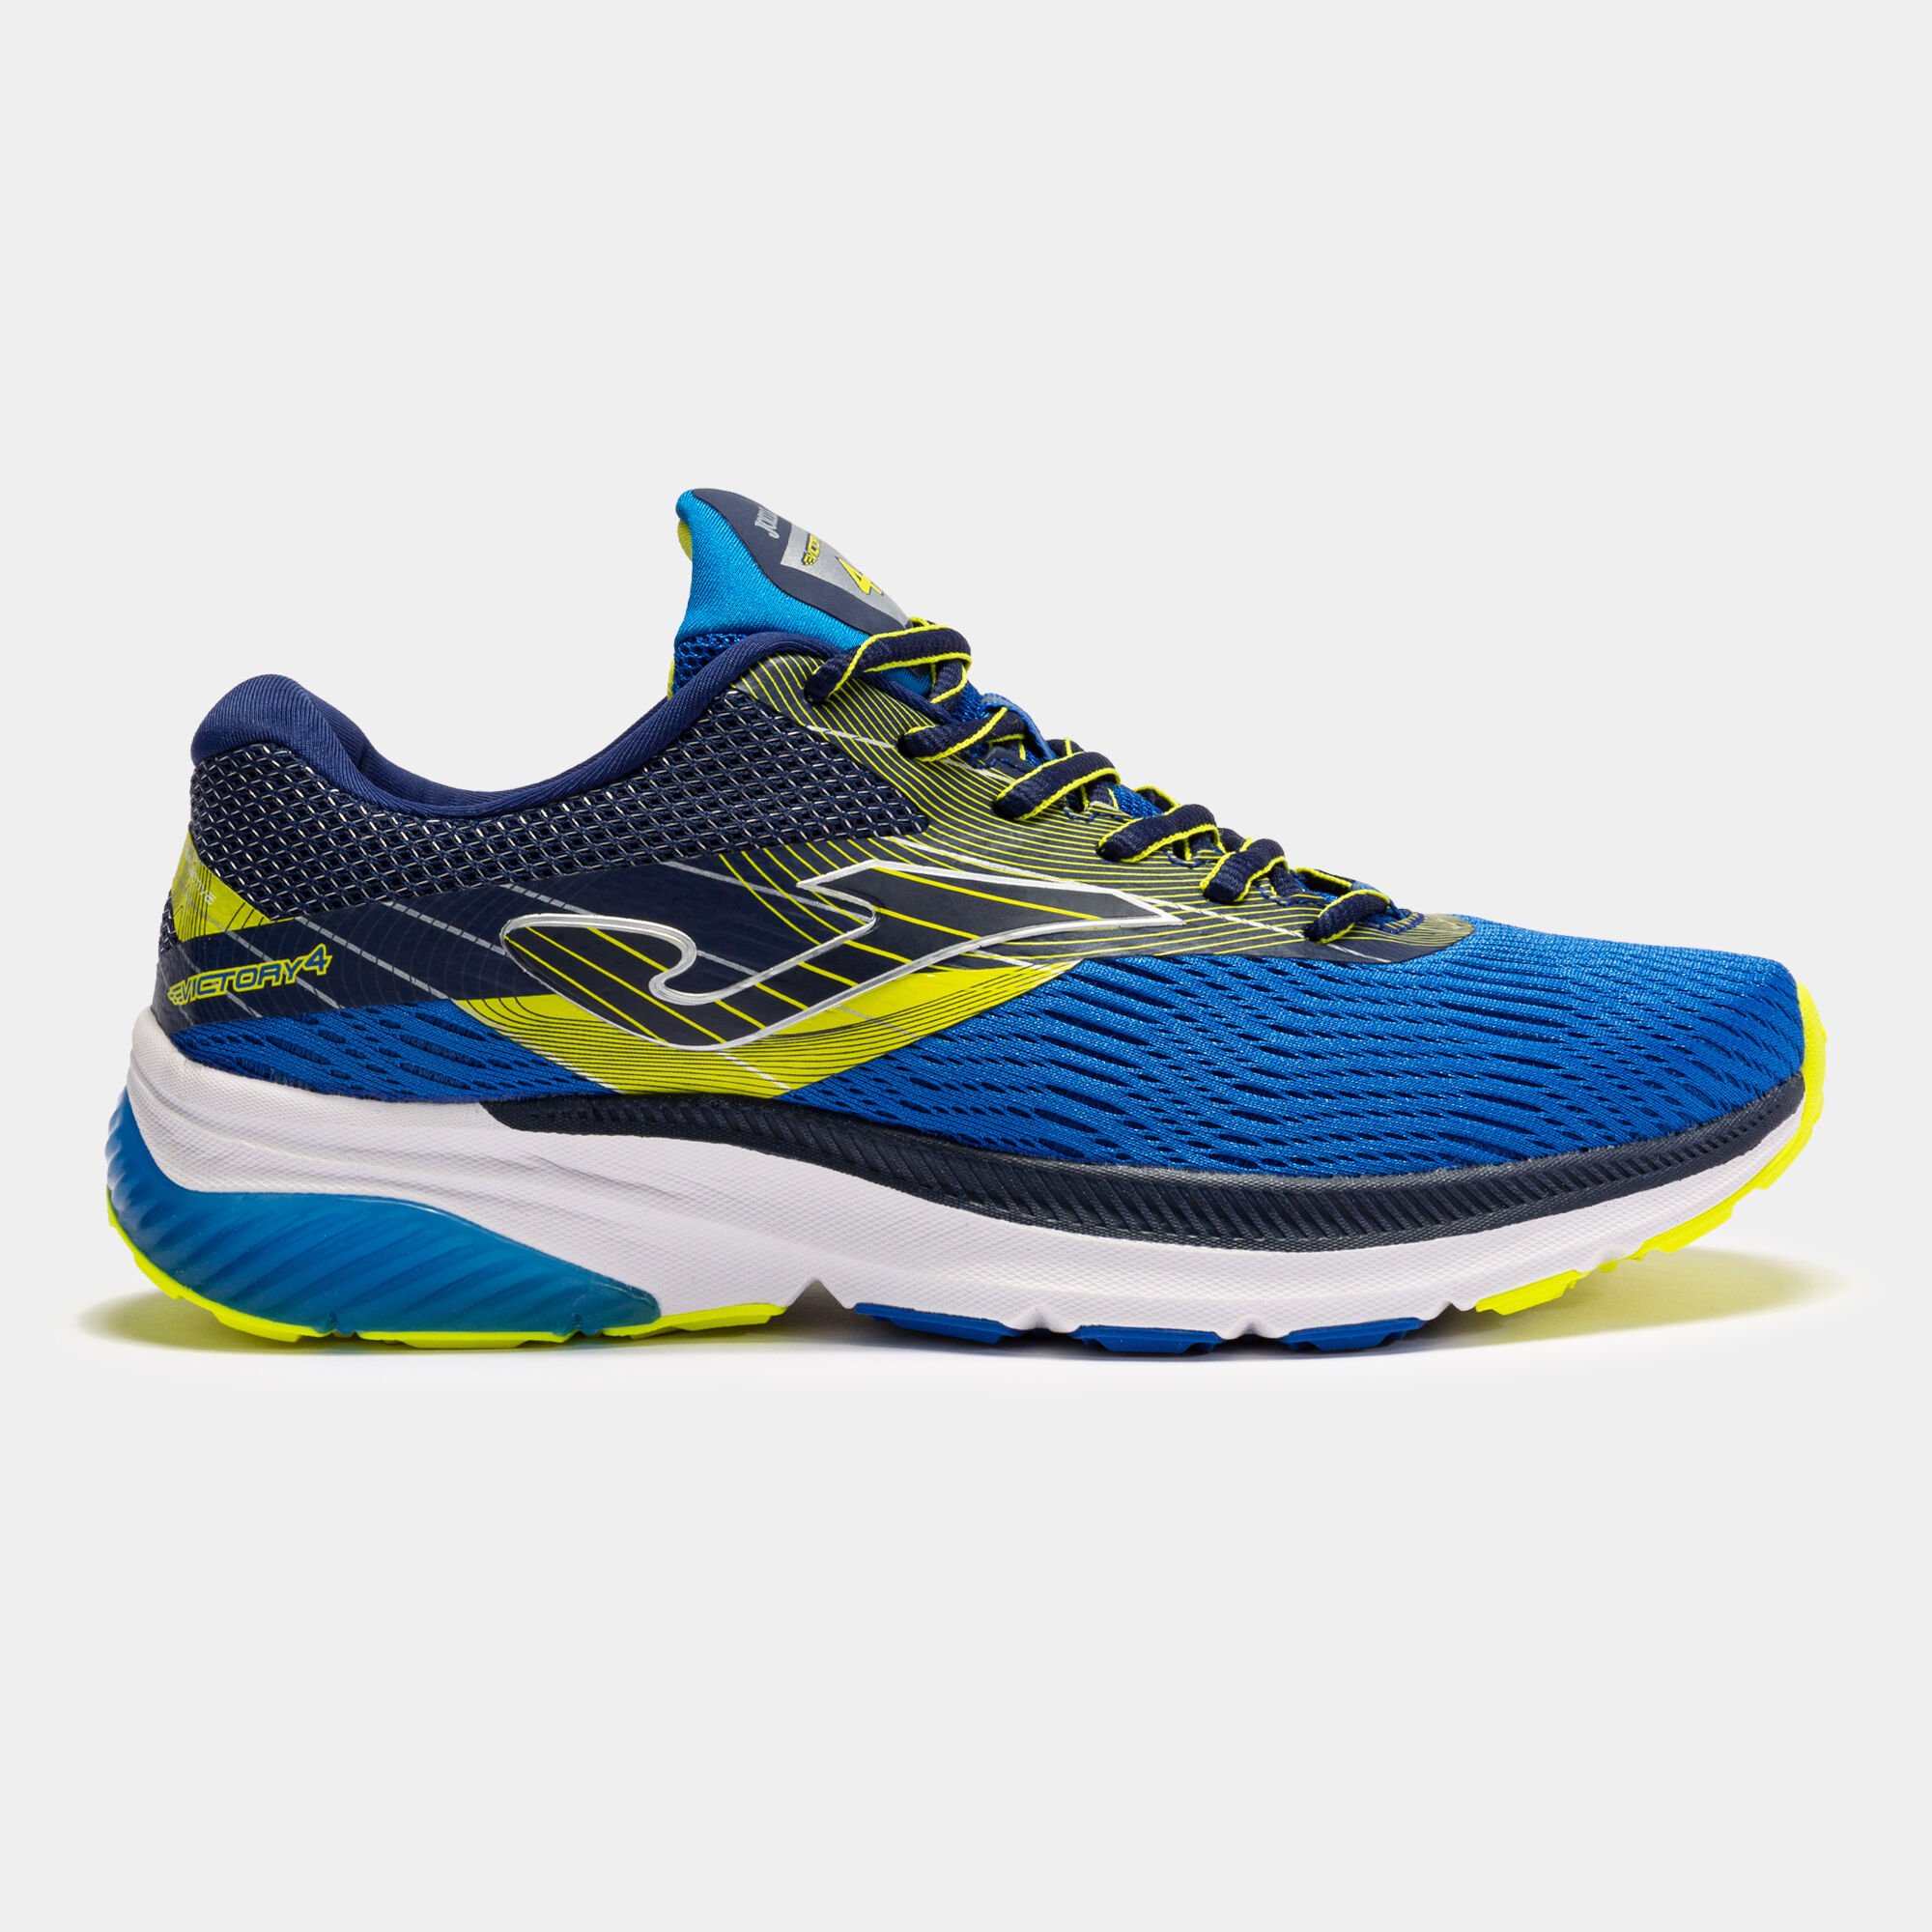 RUNNING SHOES VICTORY 22 MAN ROYAL BLUE FLUORESCENT GREEN